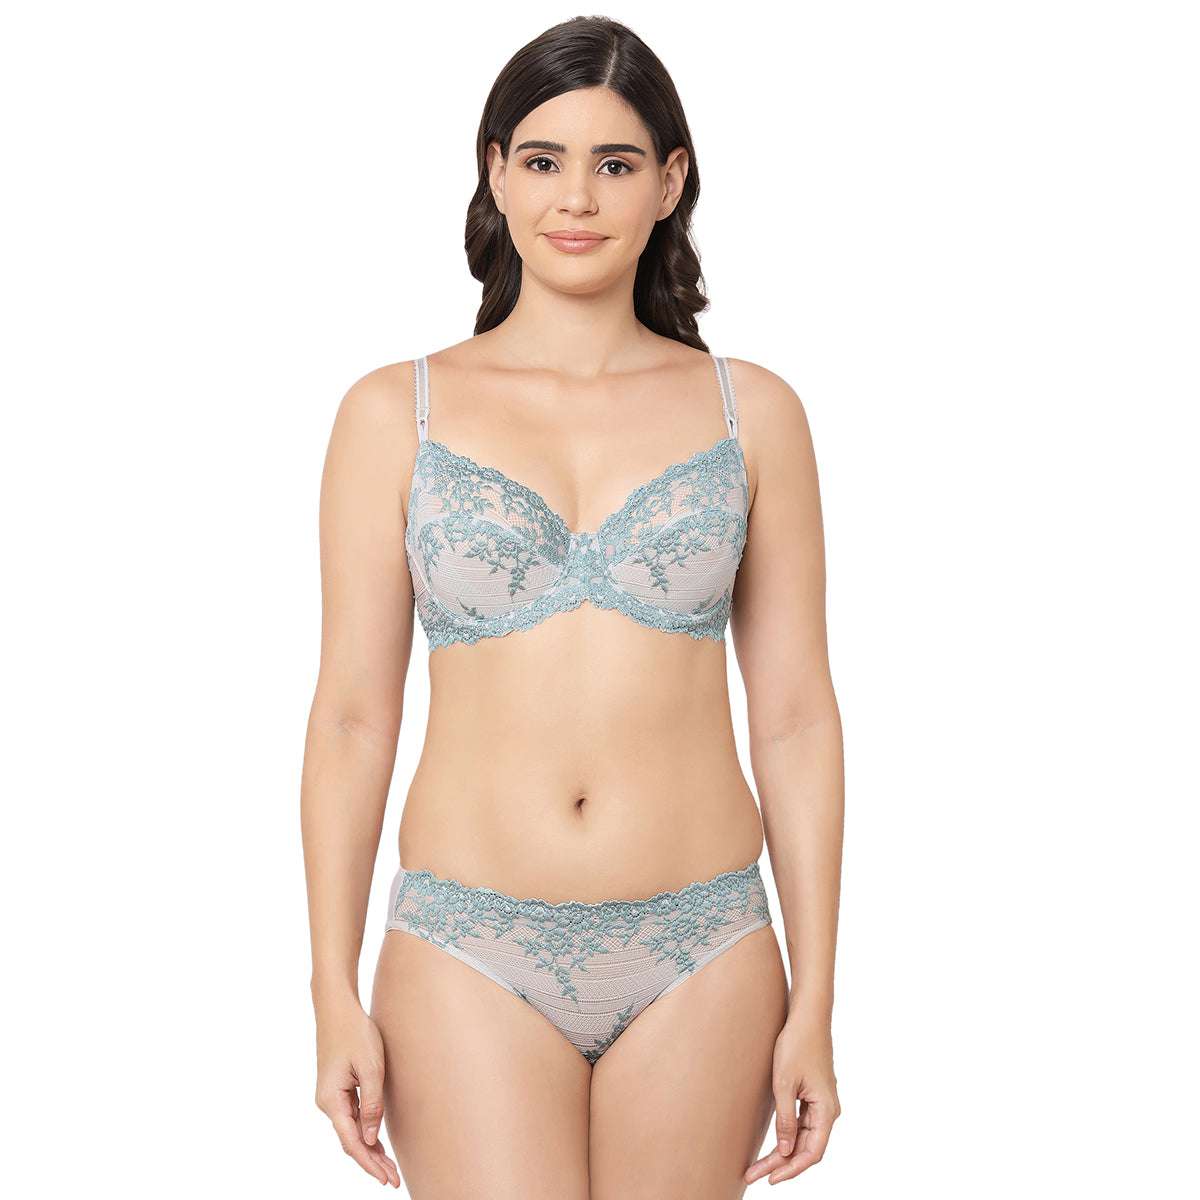 Buy Padded Non-Wired Full Cup Bridal Bra in Grey - Lace Online